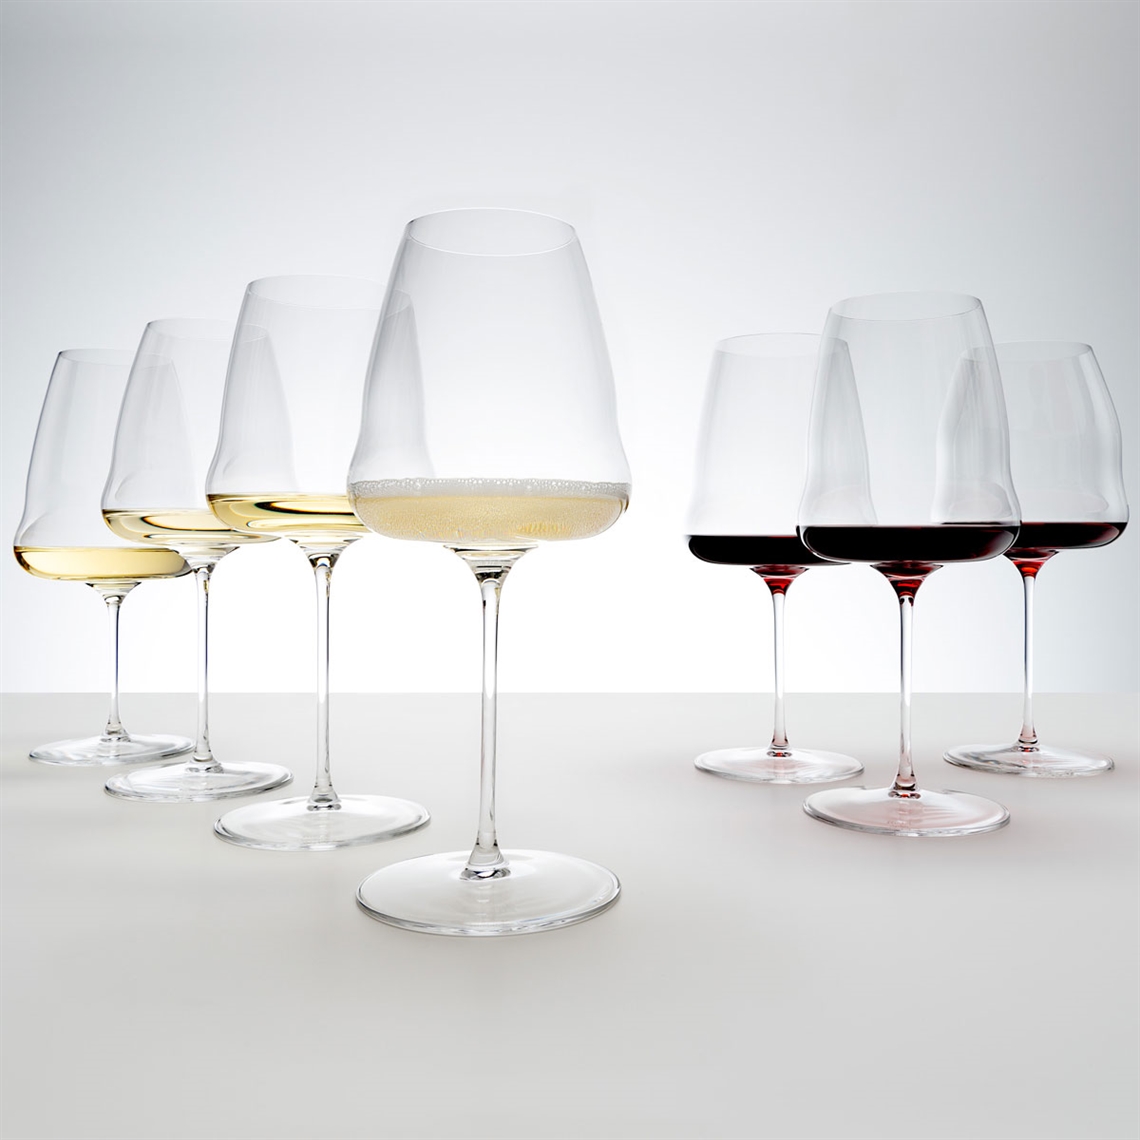 View our collection of Riedel Winewings Which Riedel wine glass to choose